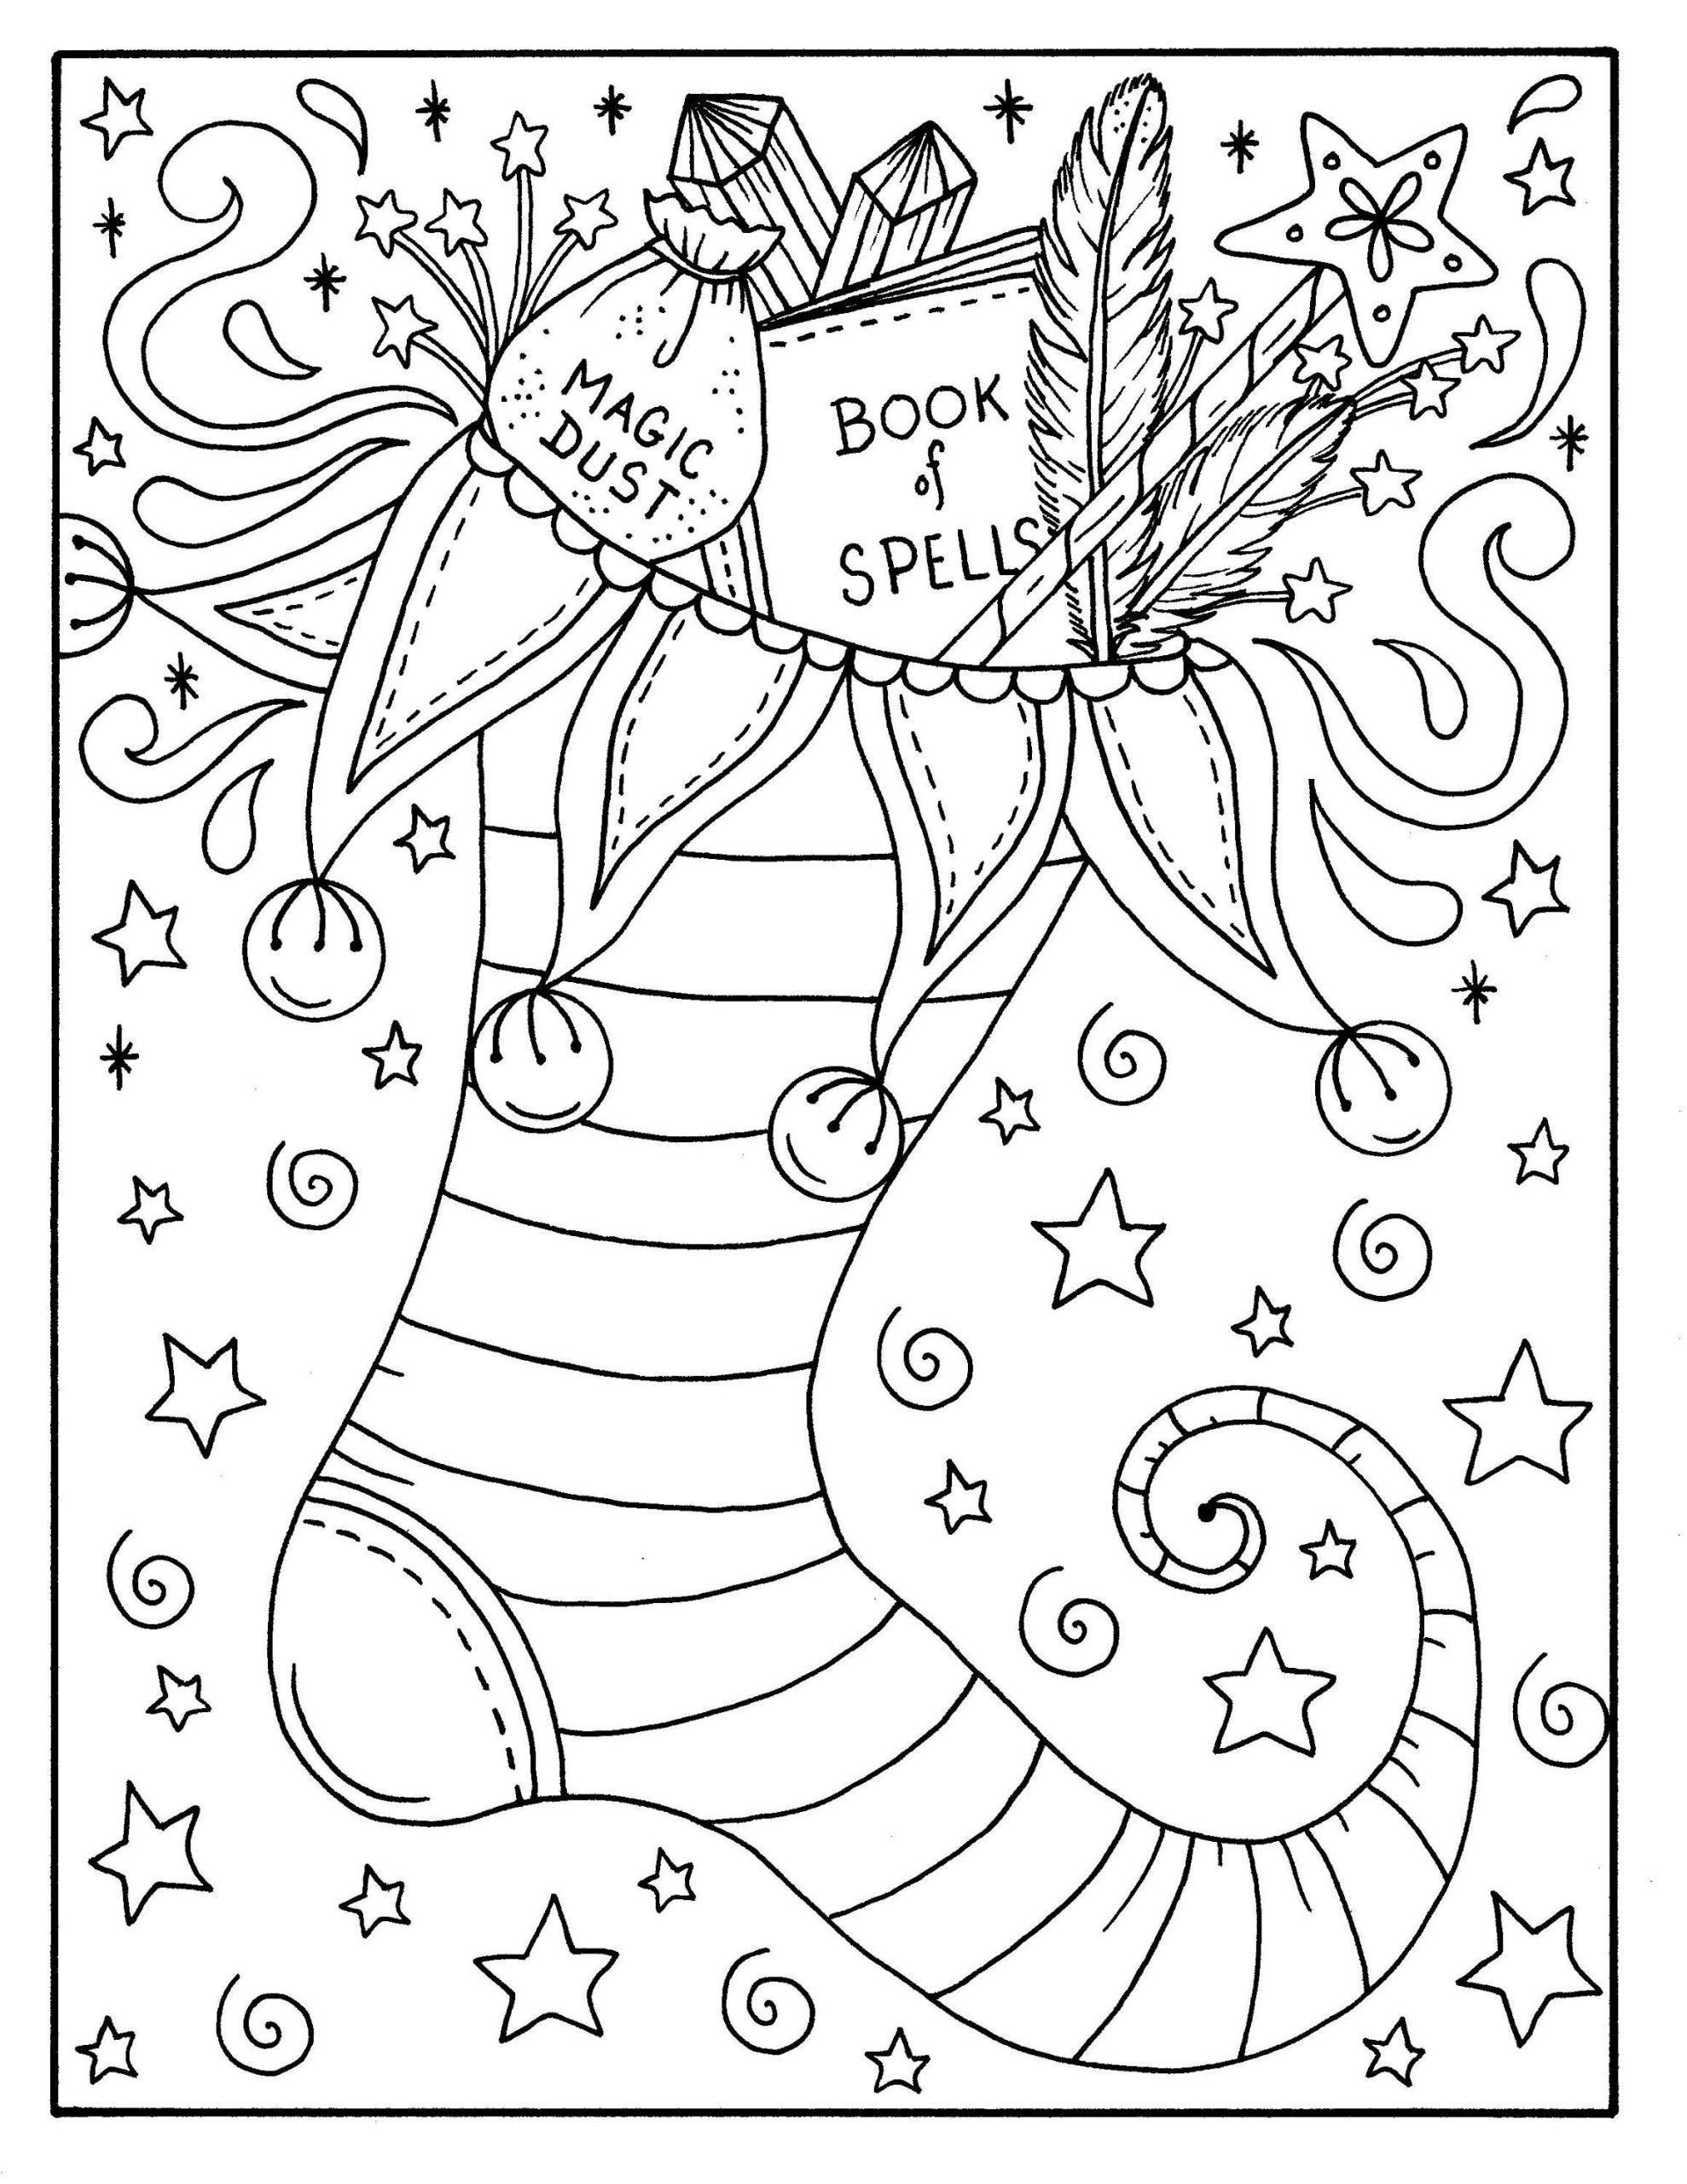 Sponges A Coloring Worksheet Christmas Coloring Pages Free Pdf Tags Christmas Coloring